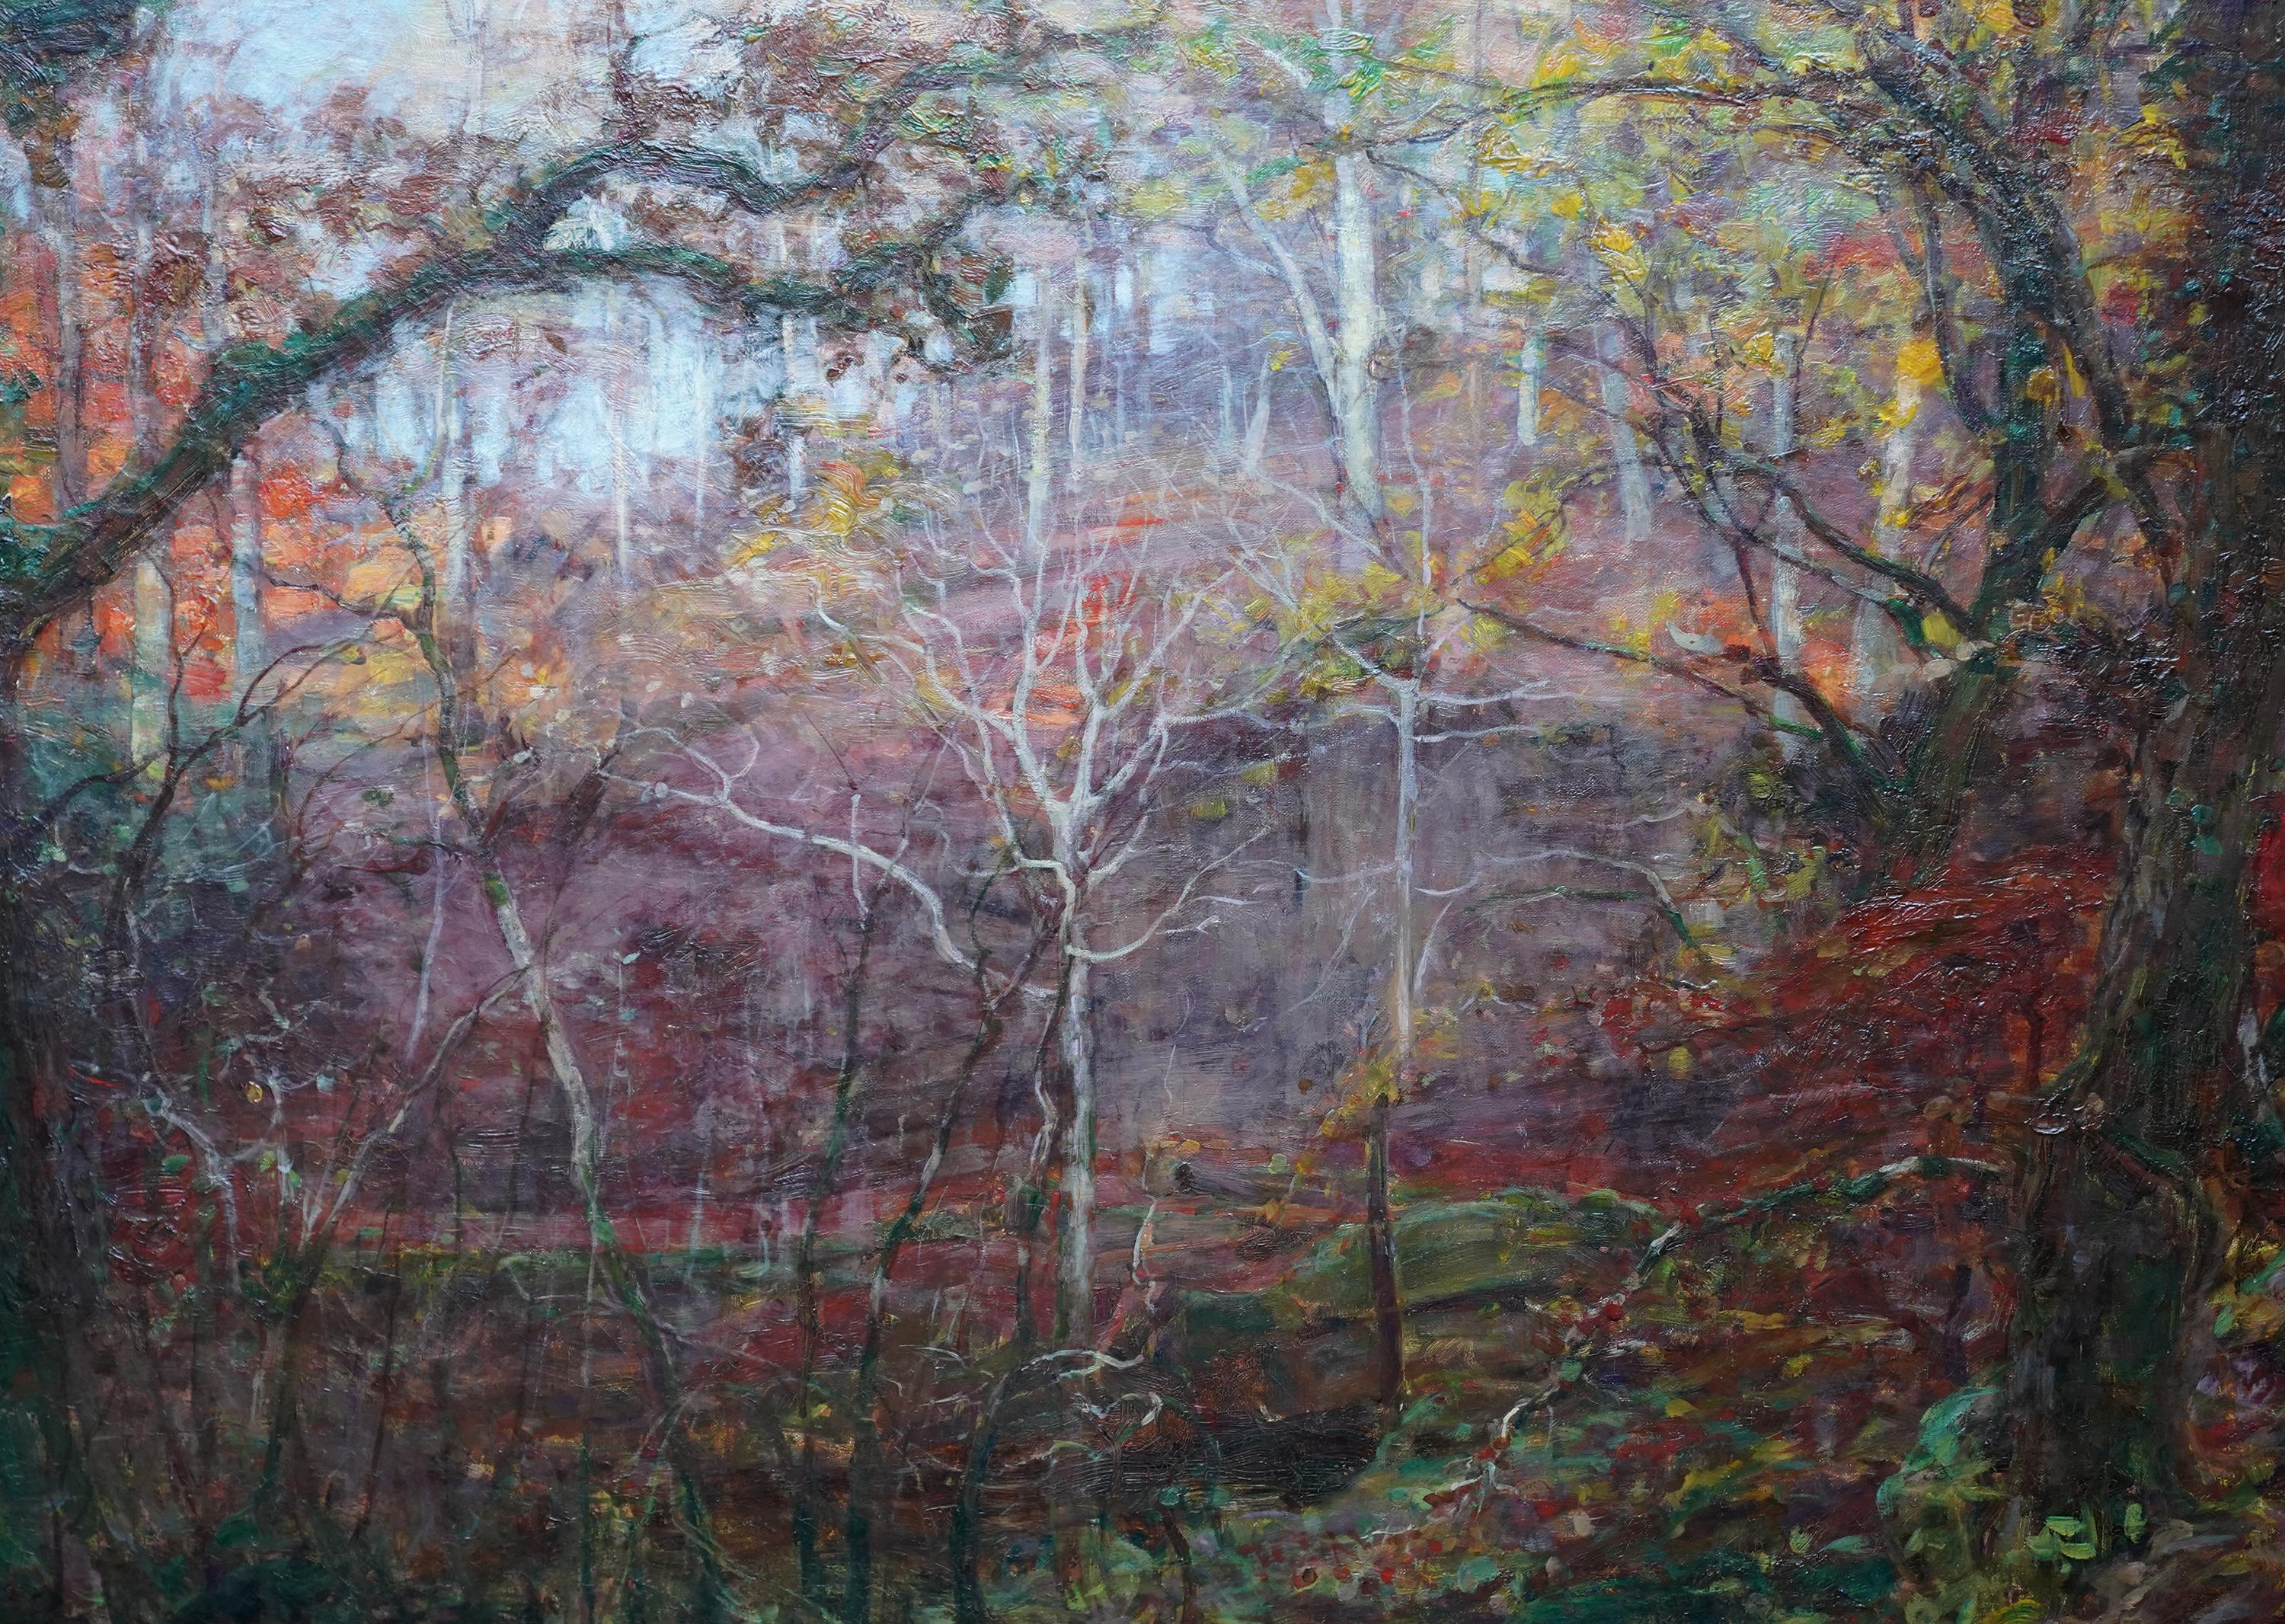 This lovely Scottish Impressionist turn of the century landscape is by noted artist Alexander Brownlie Docharty. Painted circa 1900 it is a woodland landscape in Ayrshire painted up close so one feels immersed in the trees and foliage as they